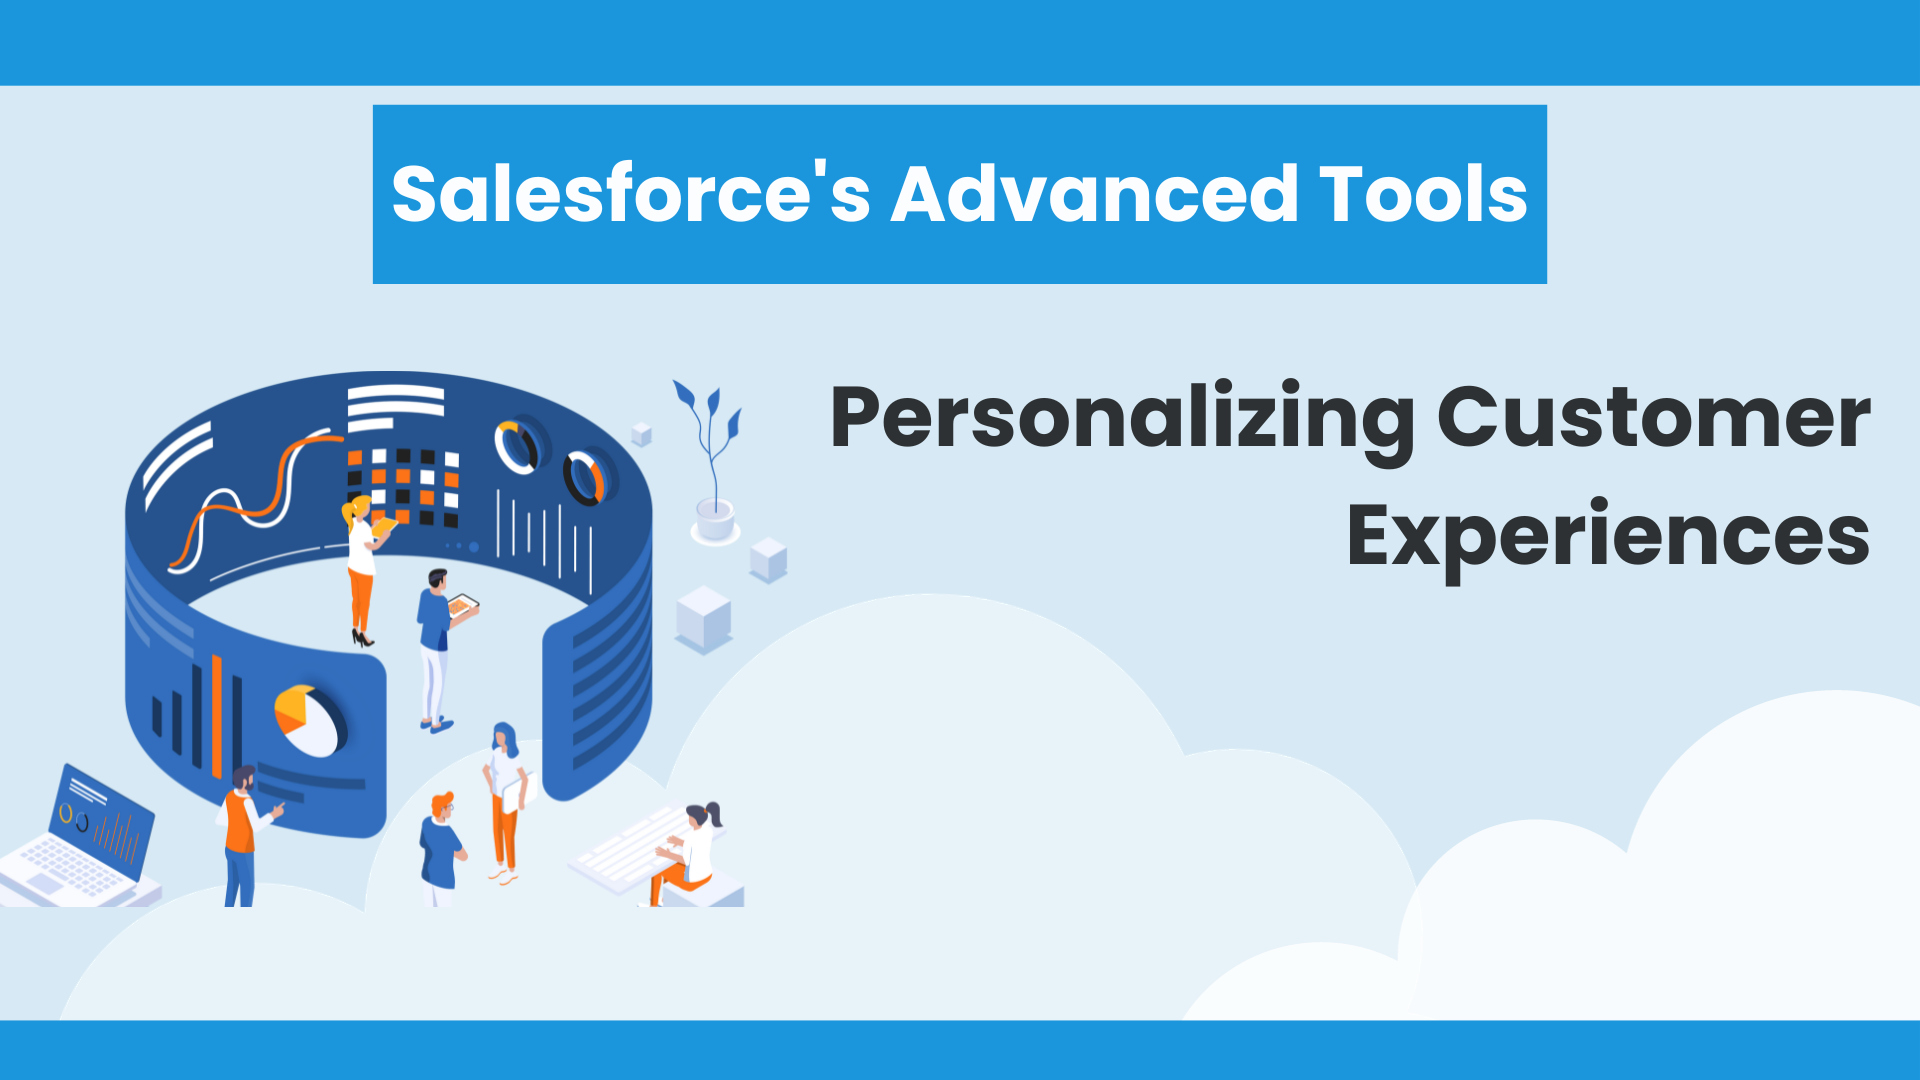 Personalizing Customer Experiences with Salesforce's Advanced Tools